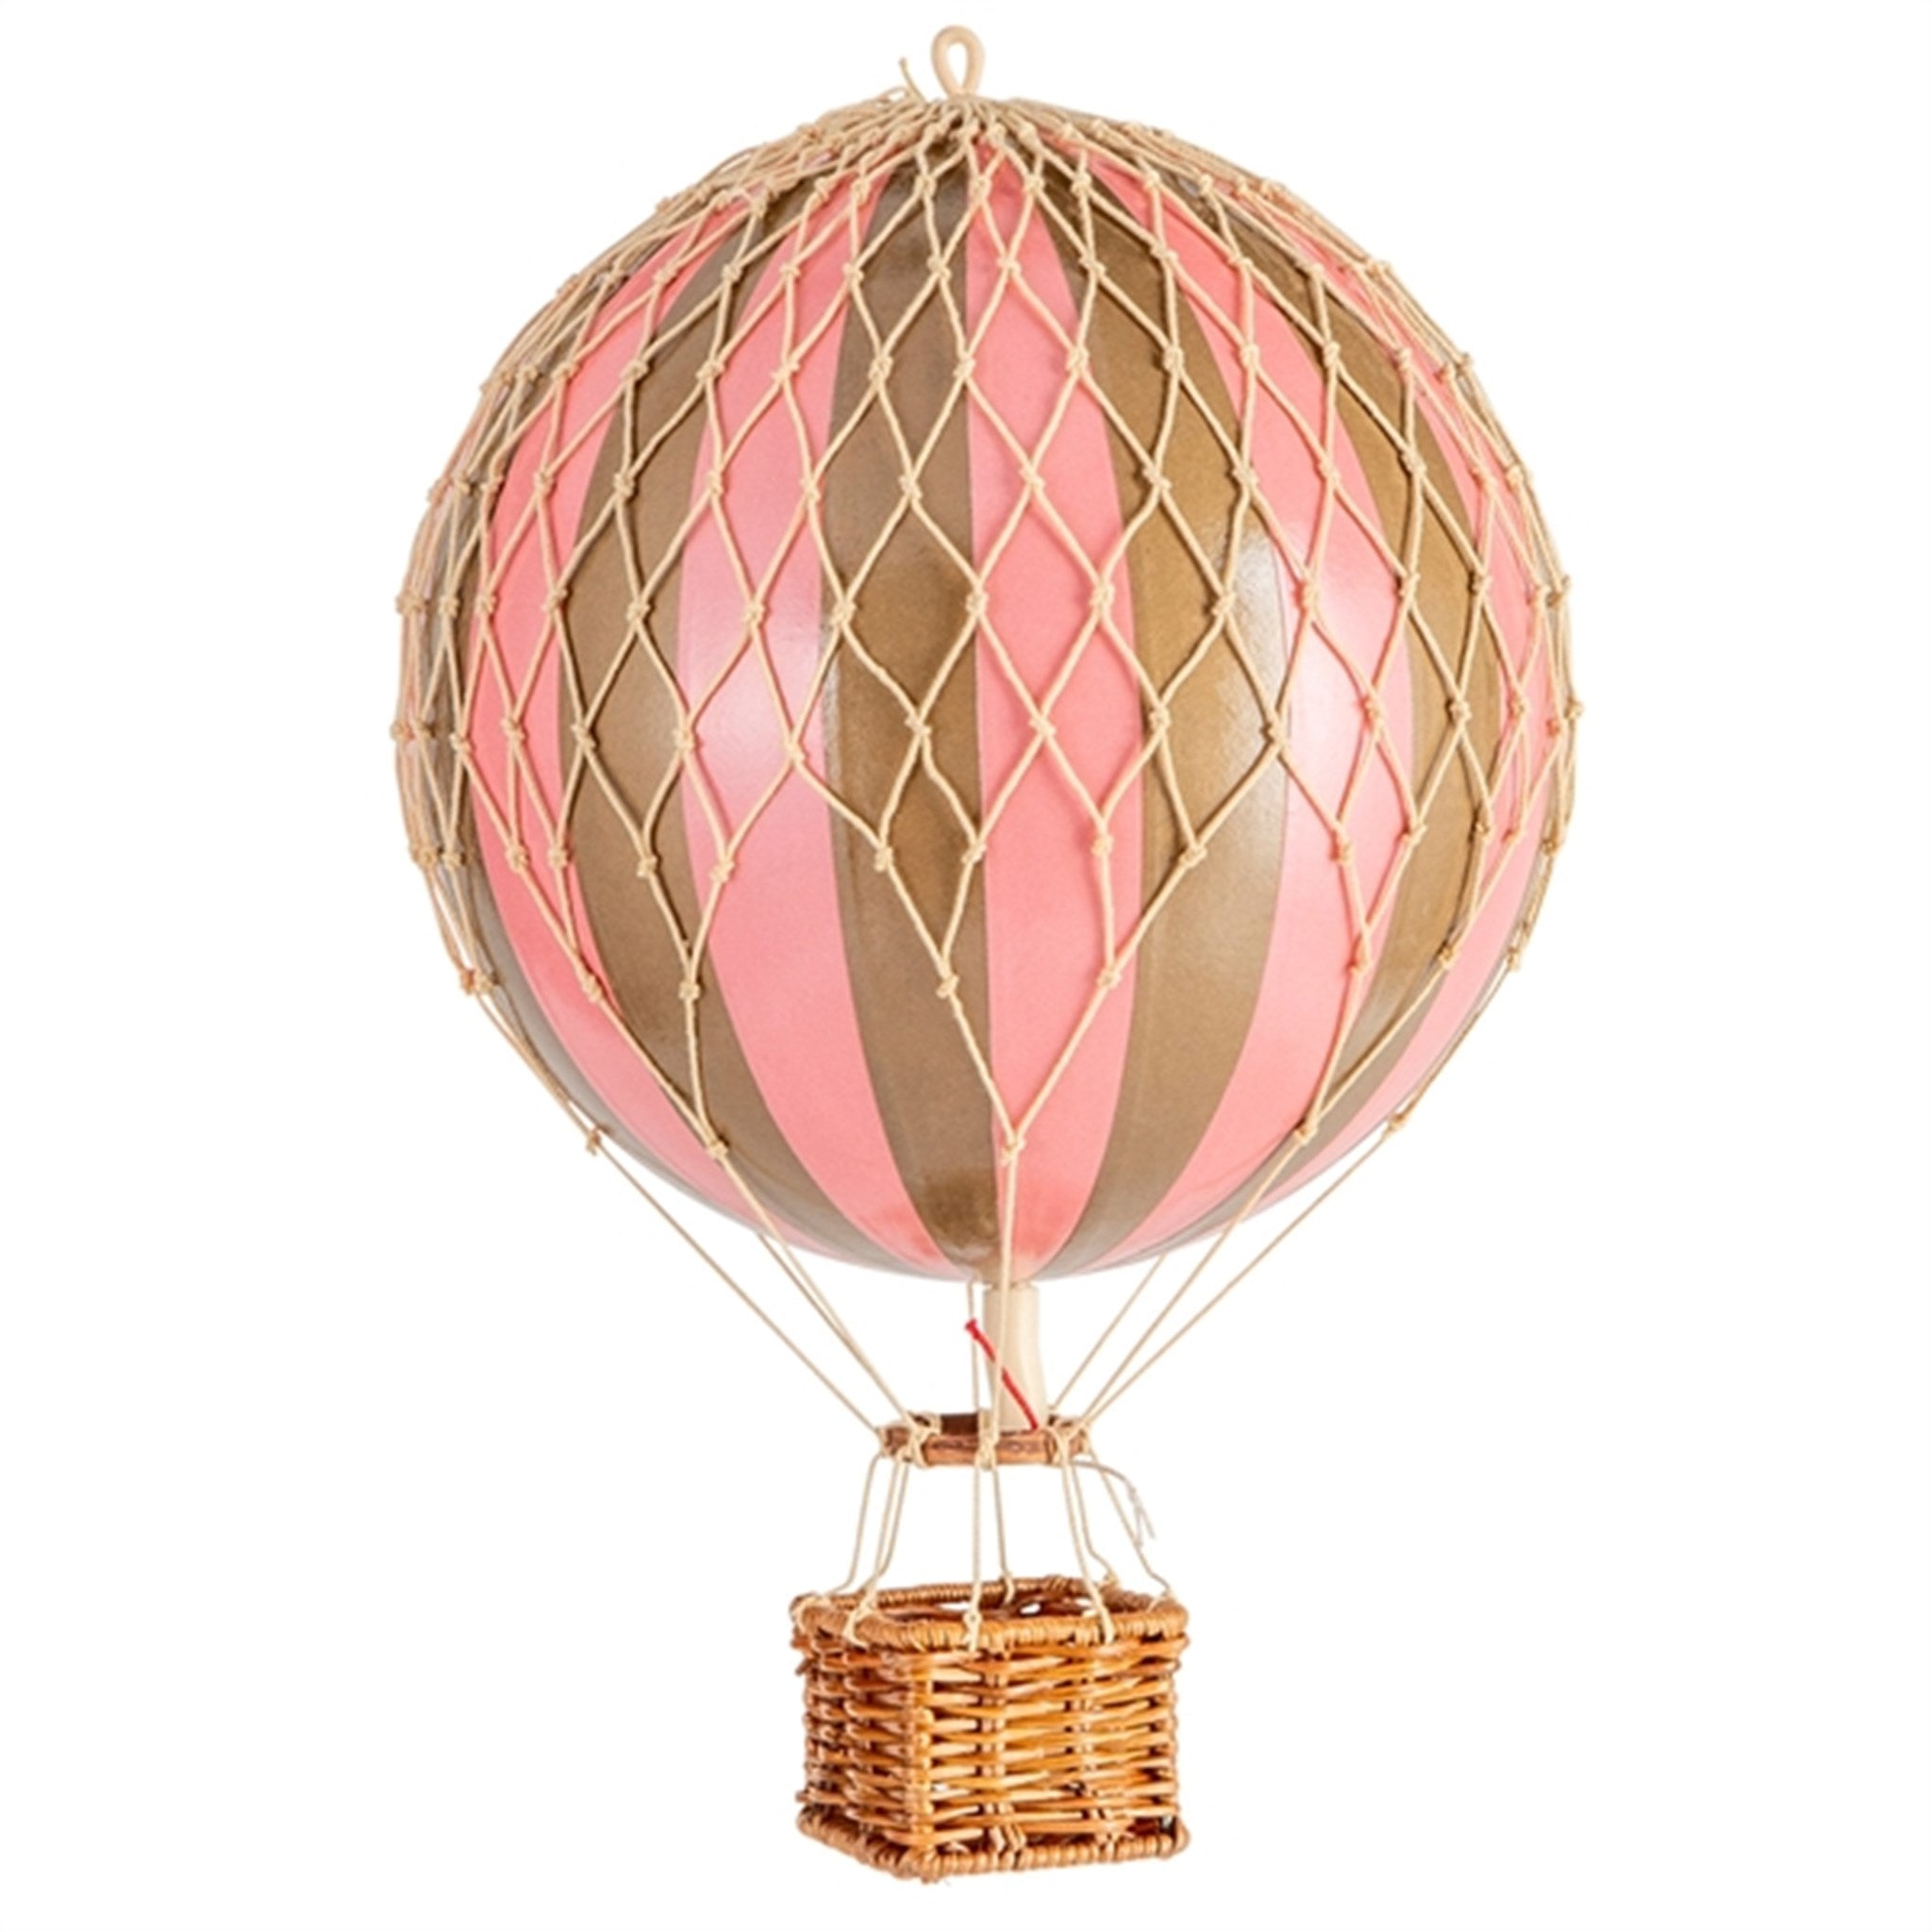 Authentic Models Balloon Gold Pink 18 cm